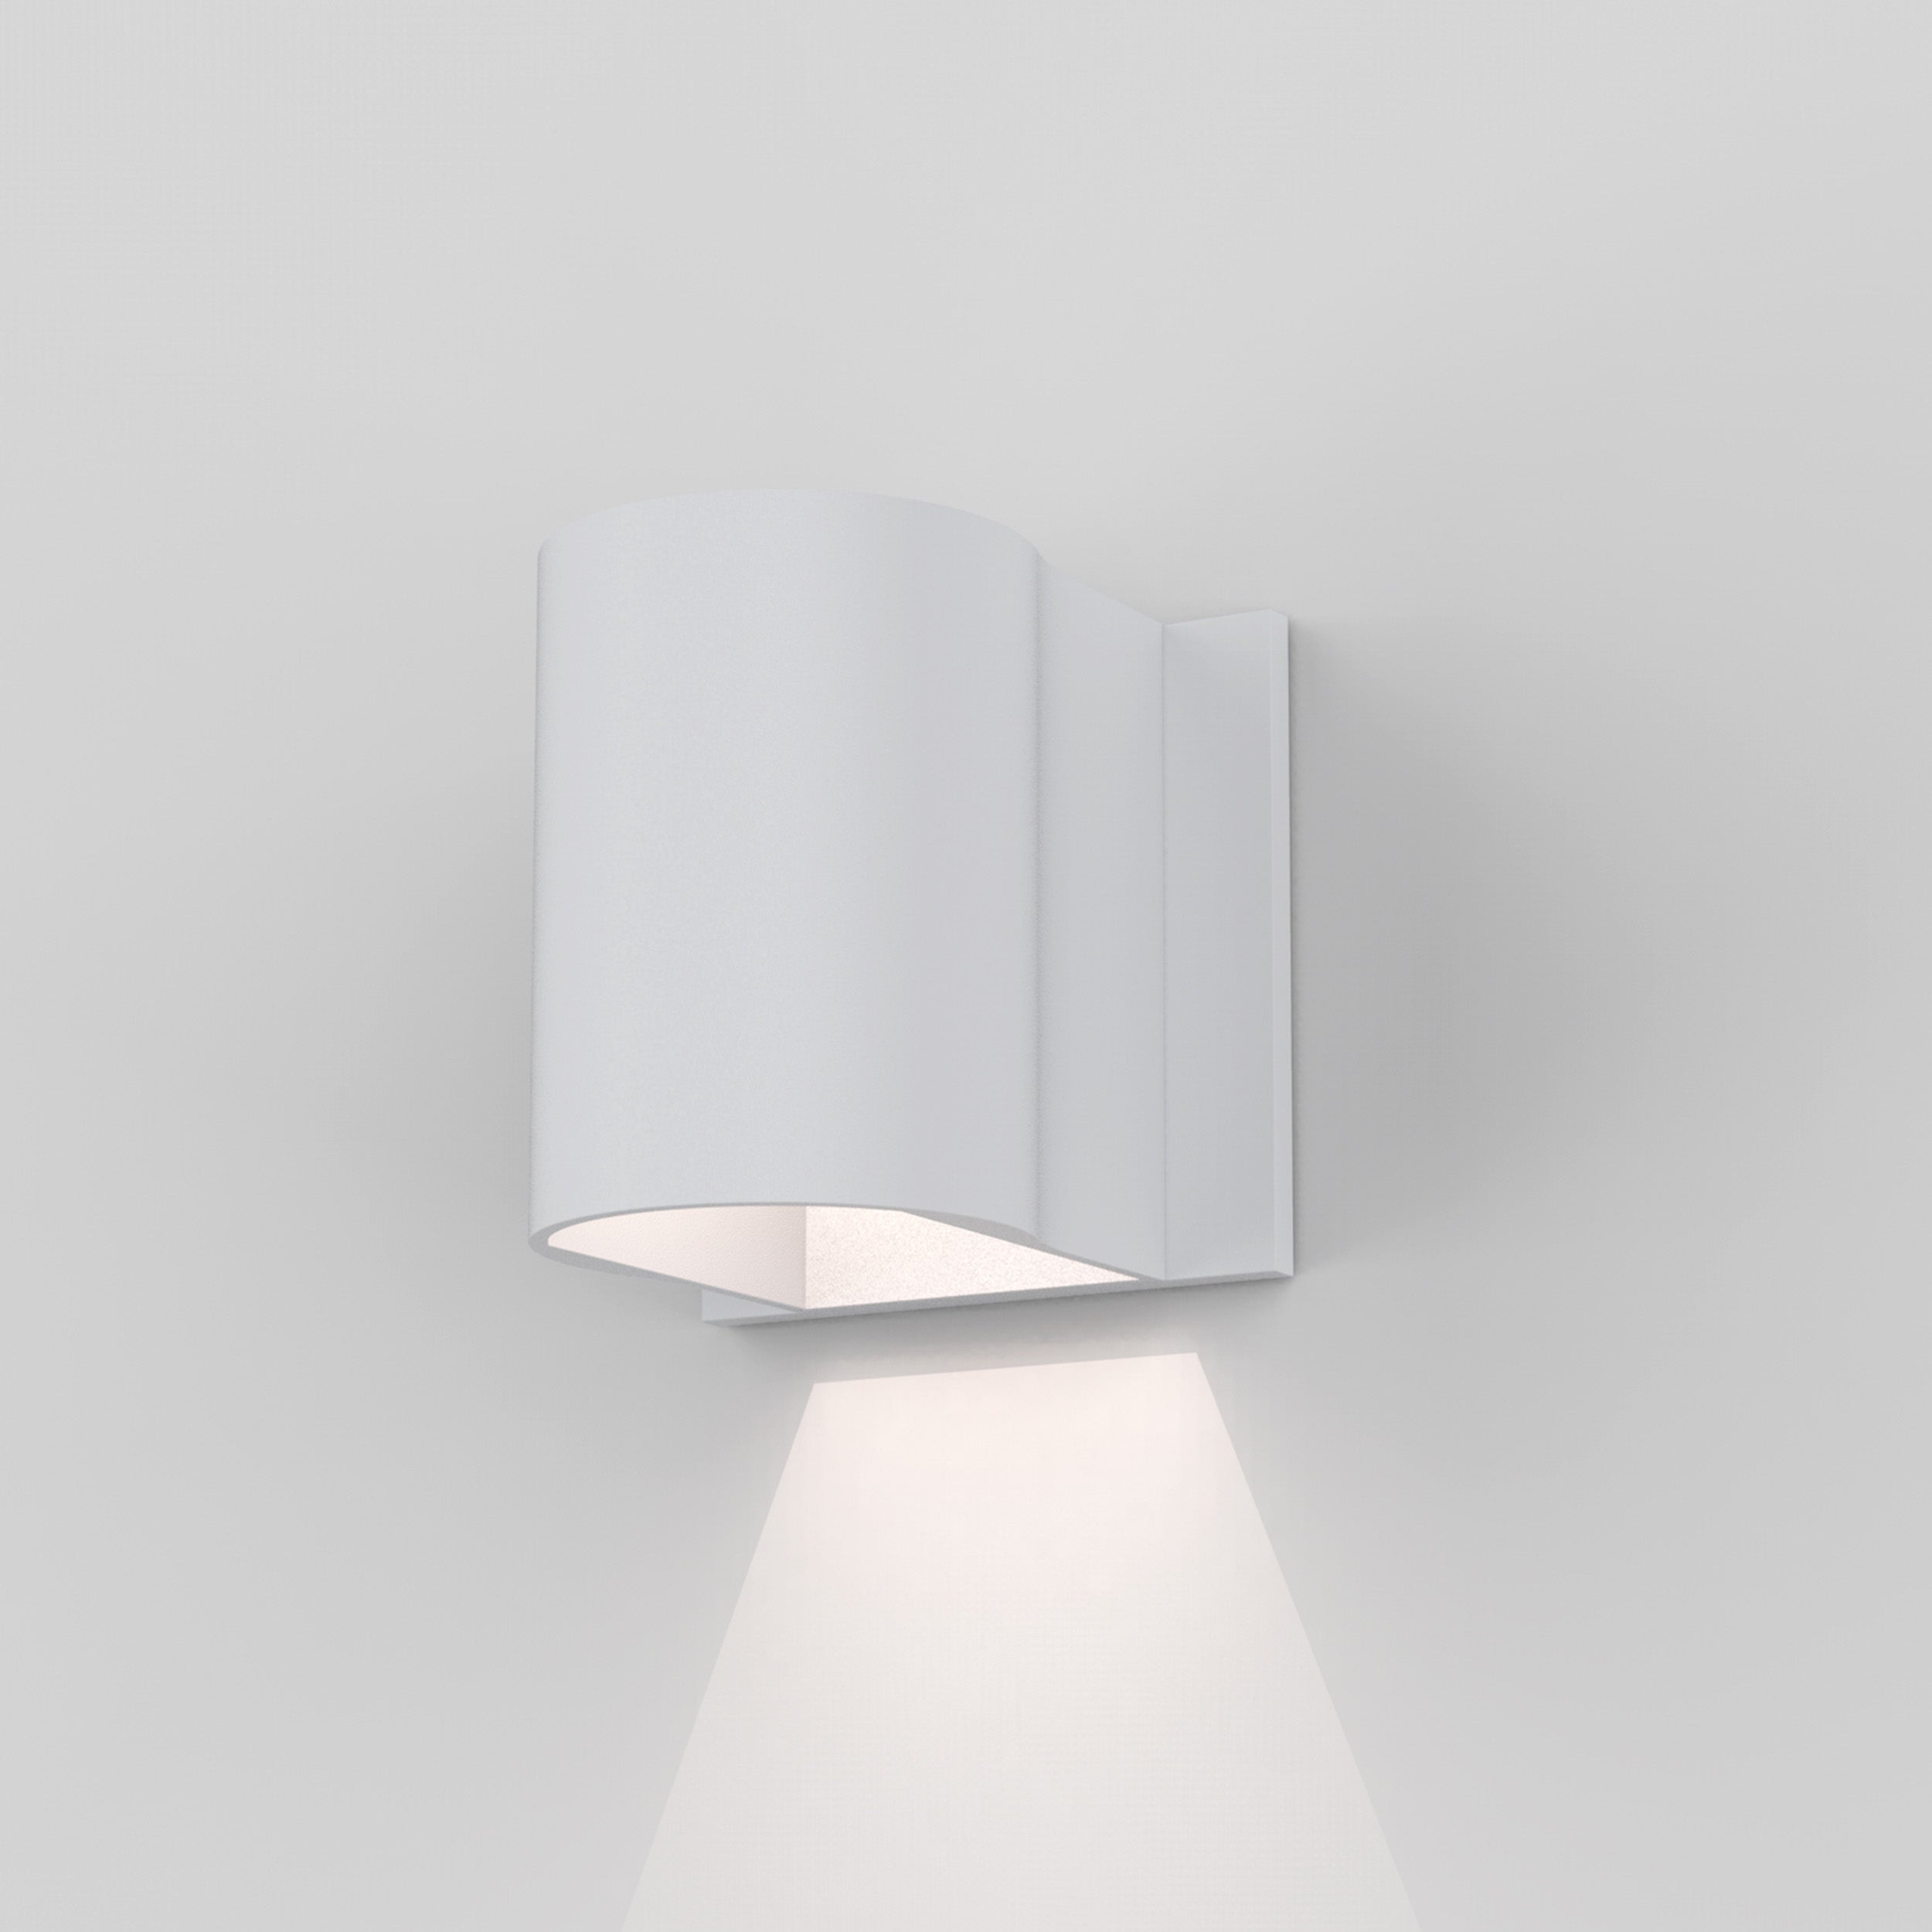 Astro Lighting Dunbar Wall Light Fixtures Astro Lighting 4.17x4.33x4.33 Textured White Yes (Integral), High Power LED